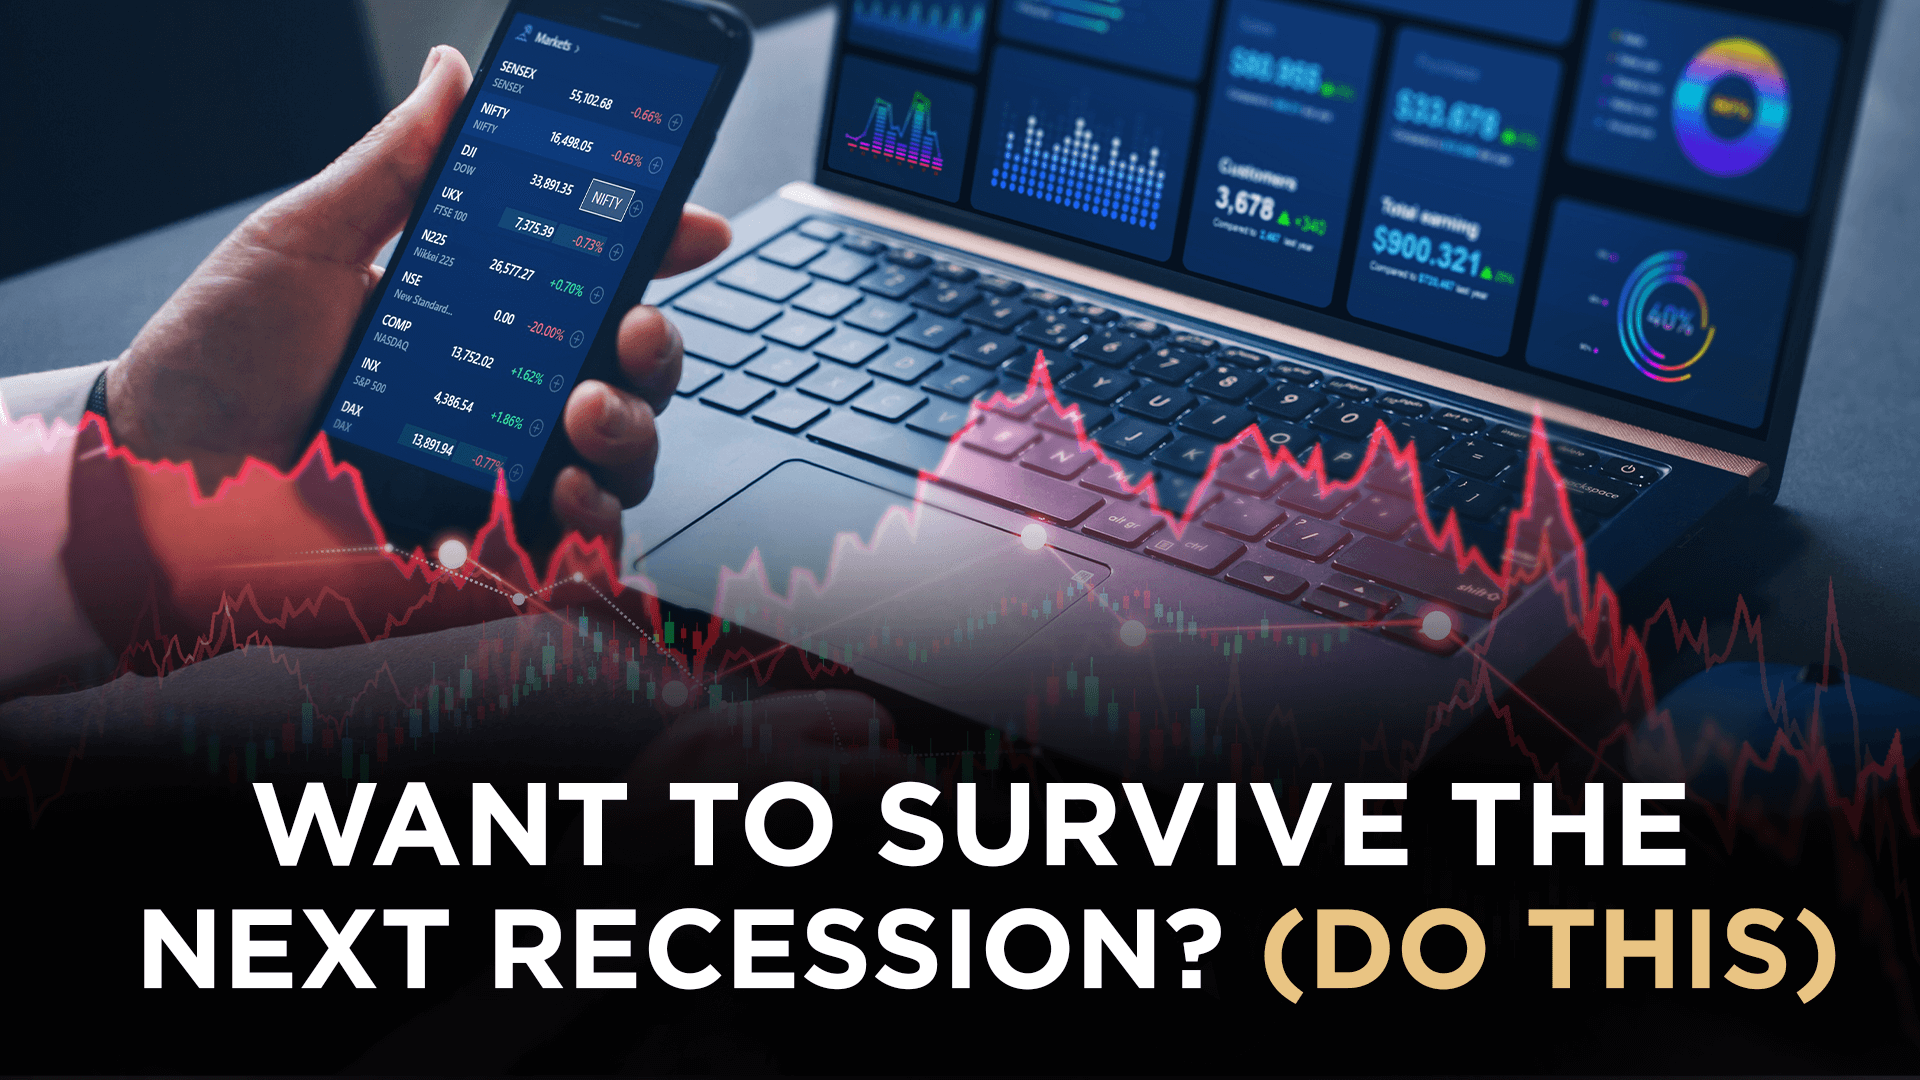 Want to survive the next recession (do this)